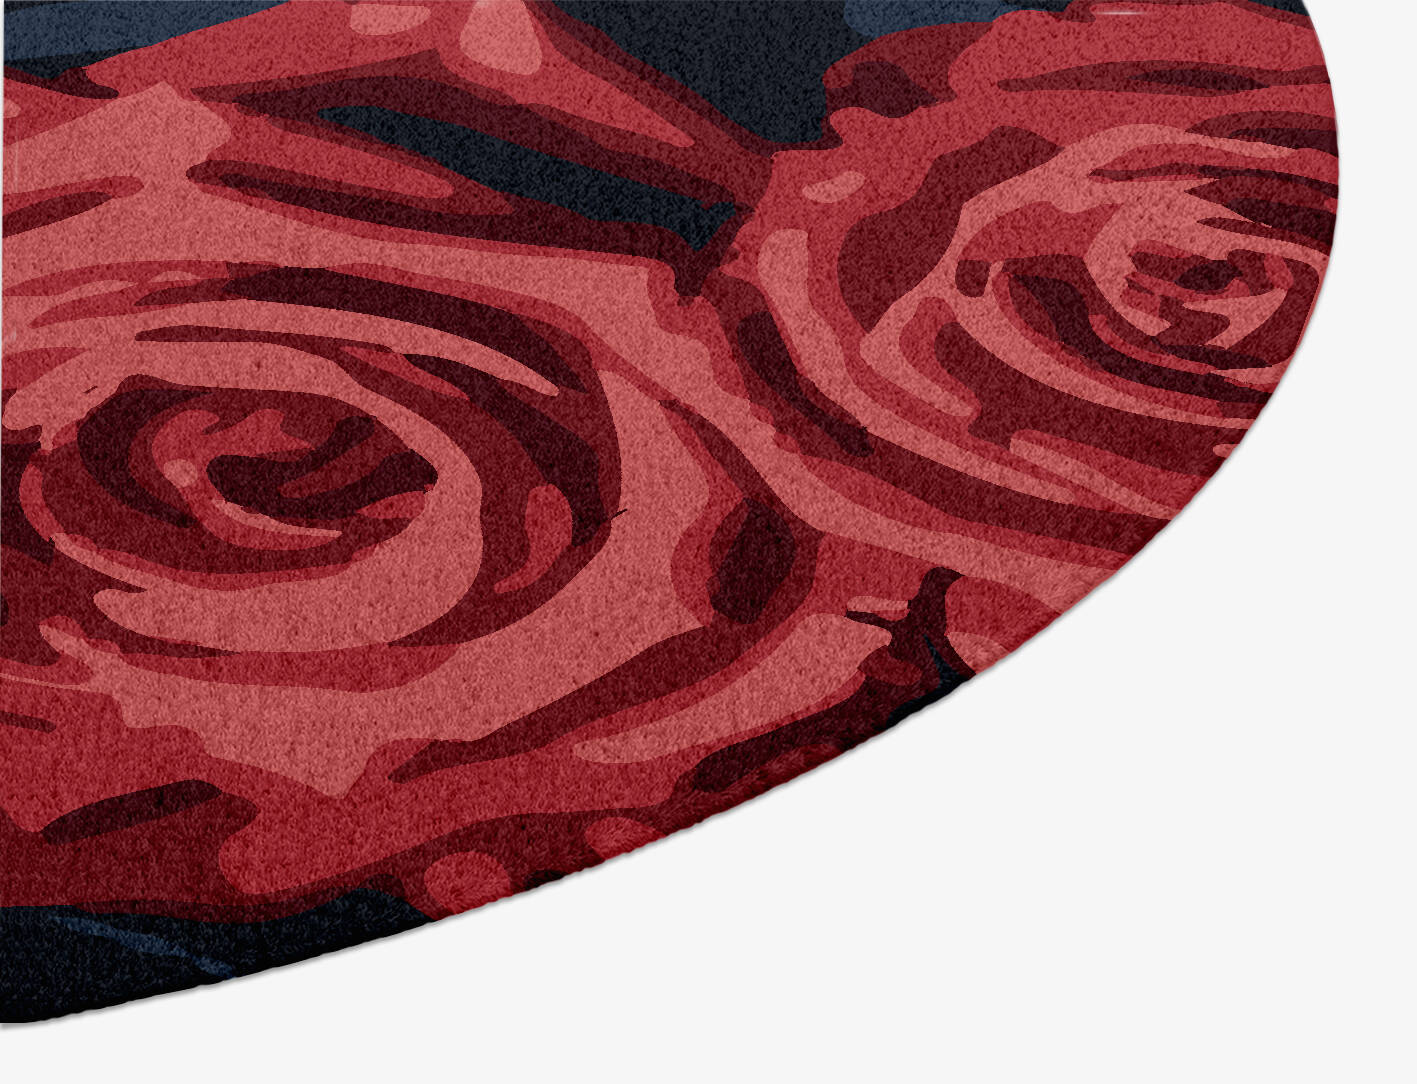 Roses Floral Oval Hand Knotted Tibetan Wool Custom Rug by Rug Artisan